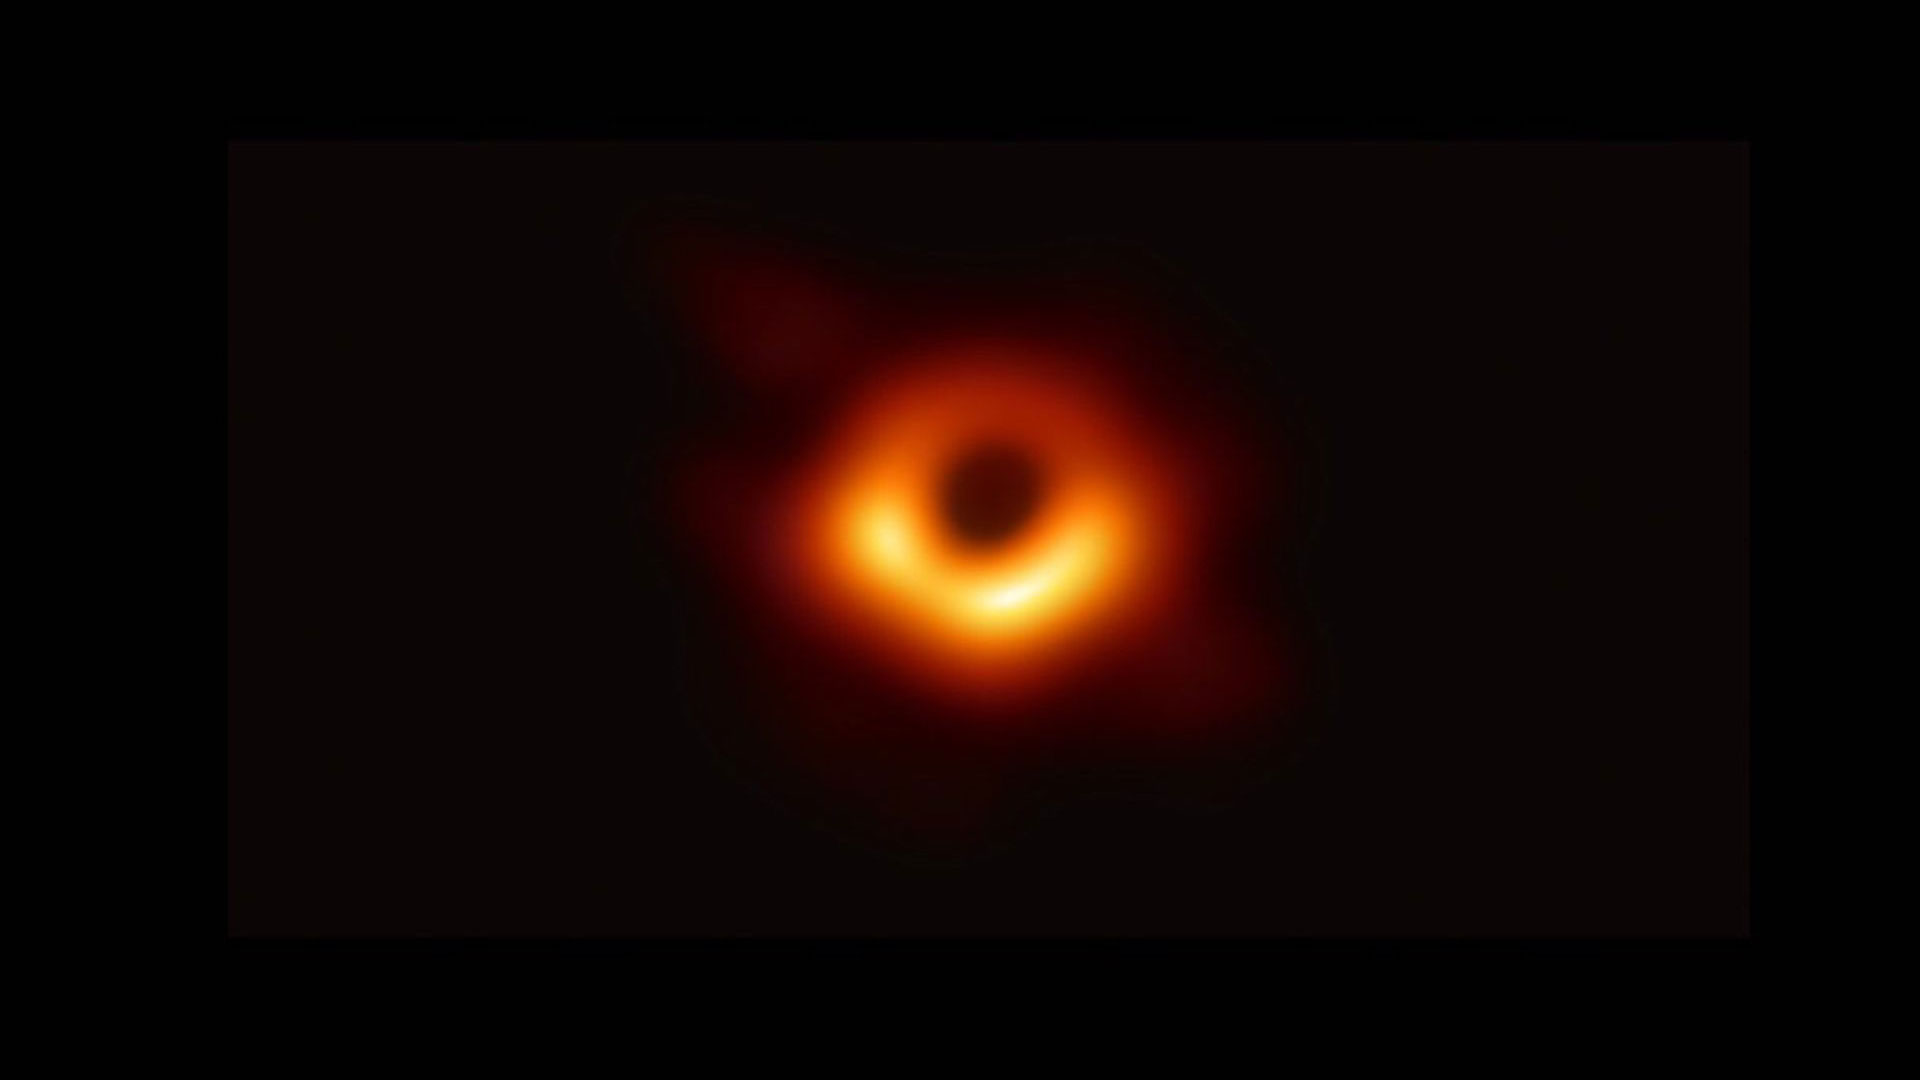 Image of black hole in the Milky Way galaxy. 